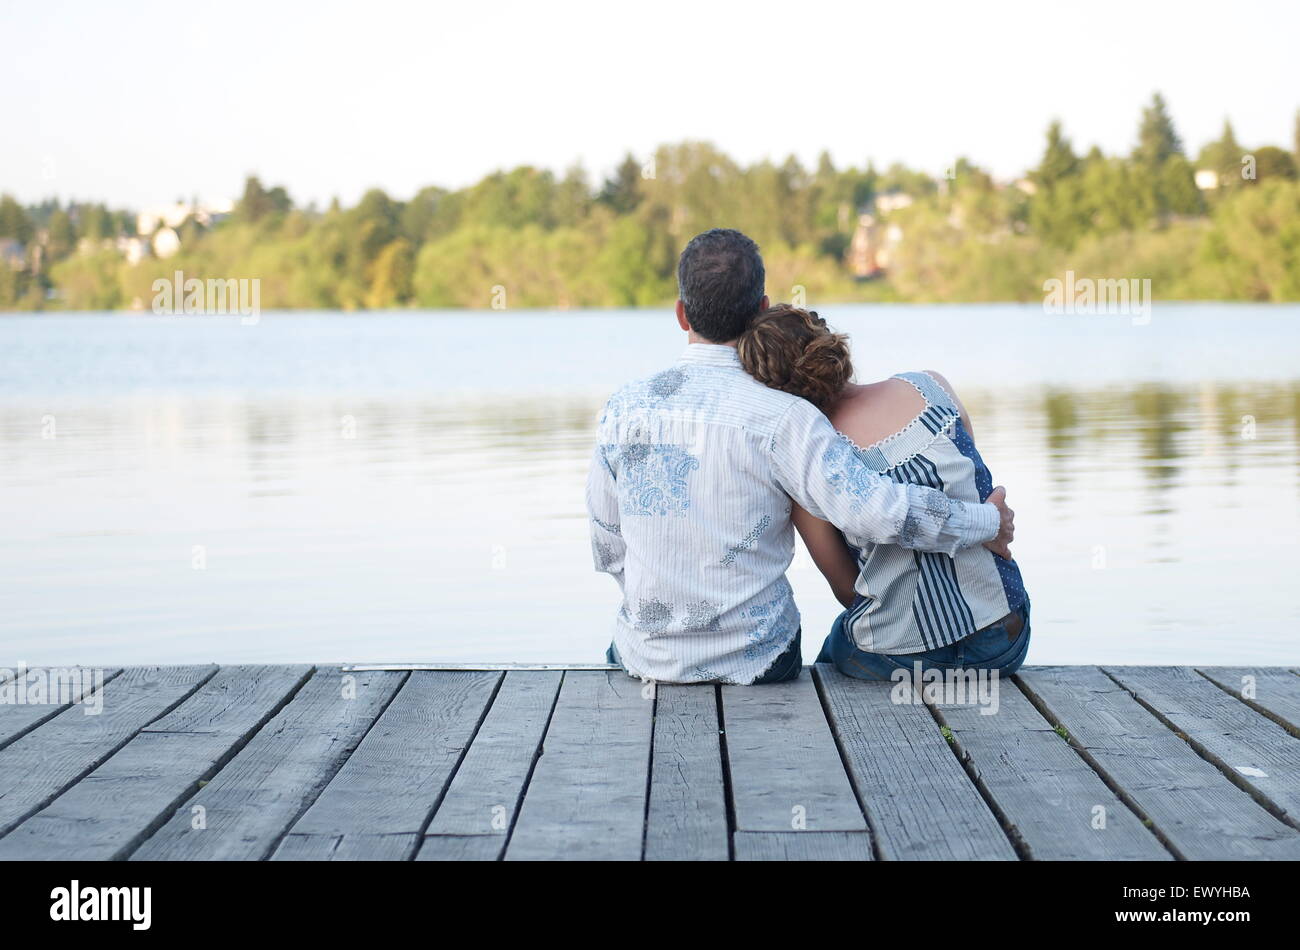 Rear view of a Couple sitting on a wooden jetty embracing Stock Photo